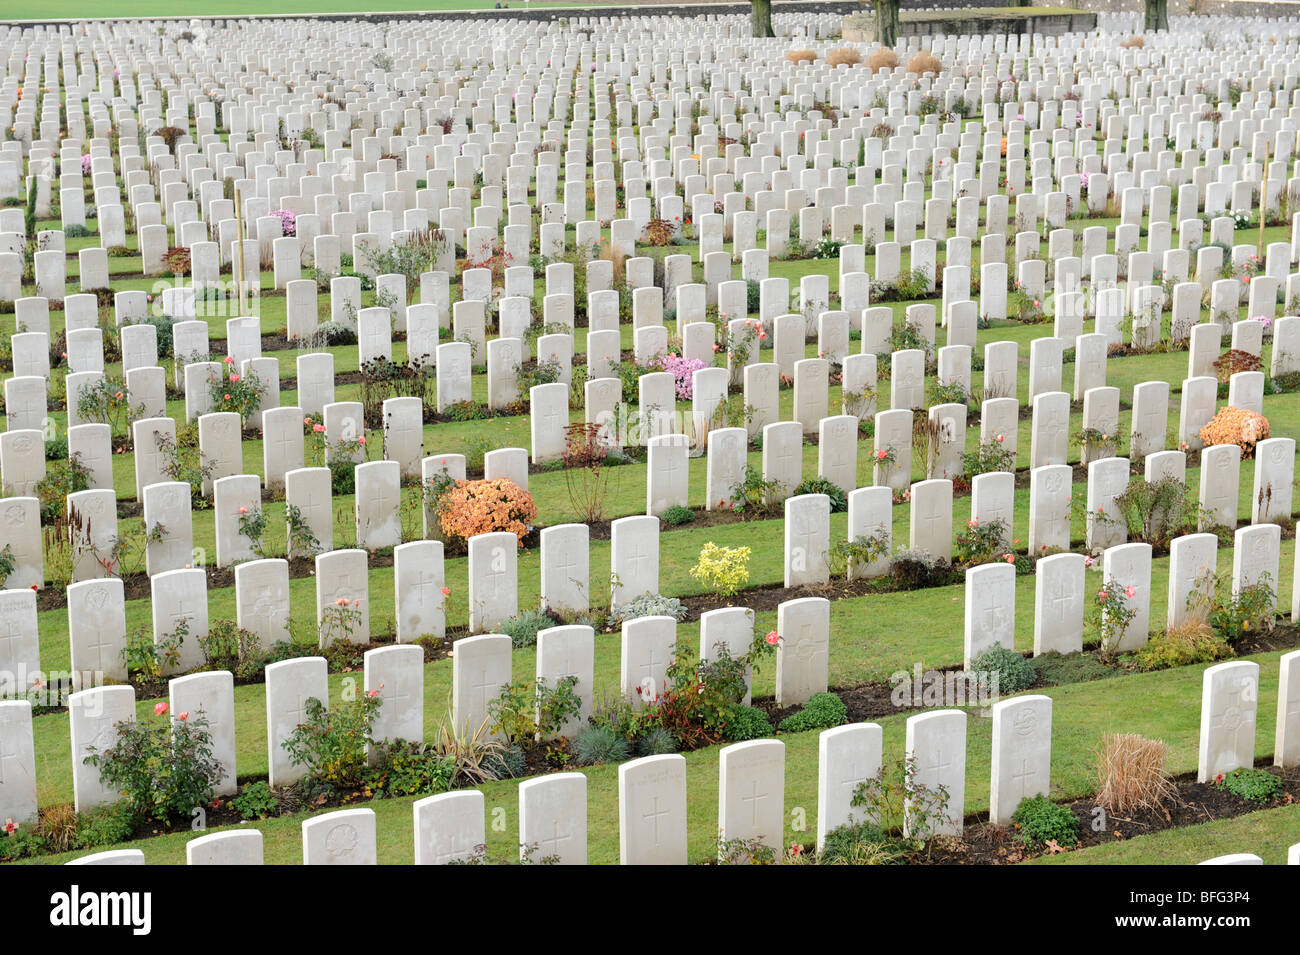 Graves of First World War soldiers at Tyne Cot Cemetery Passchendale Ypres Belgium Stock Photo